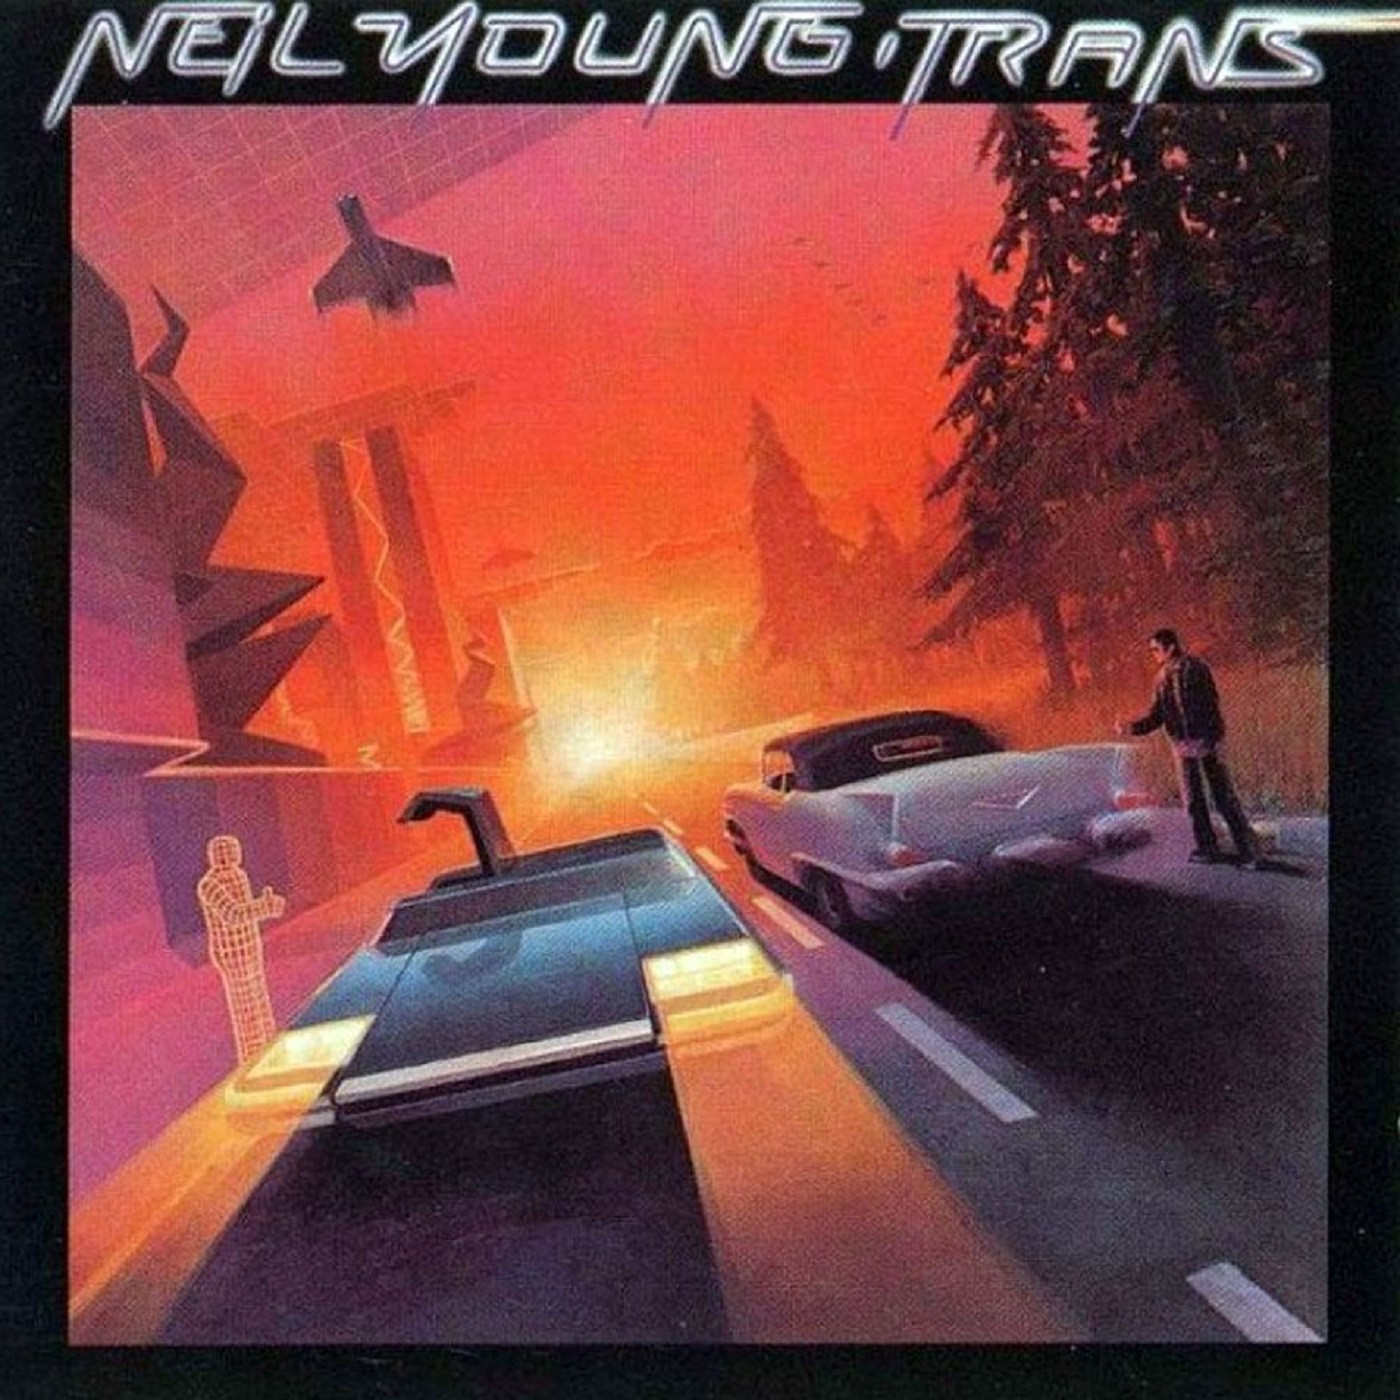 Neil Young’s “Trans”